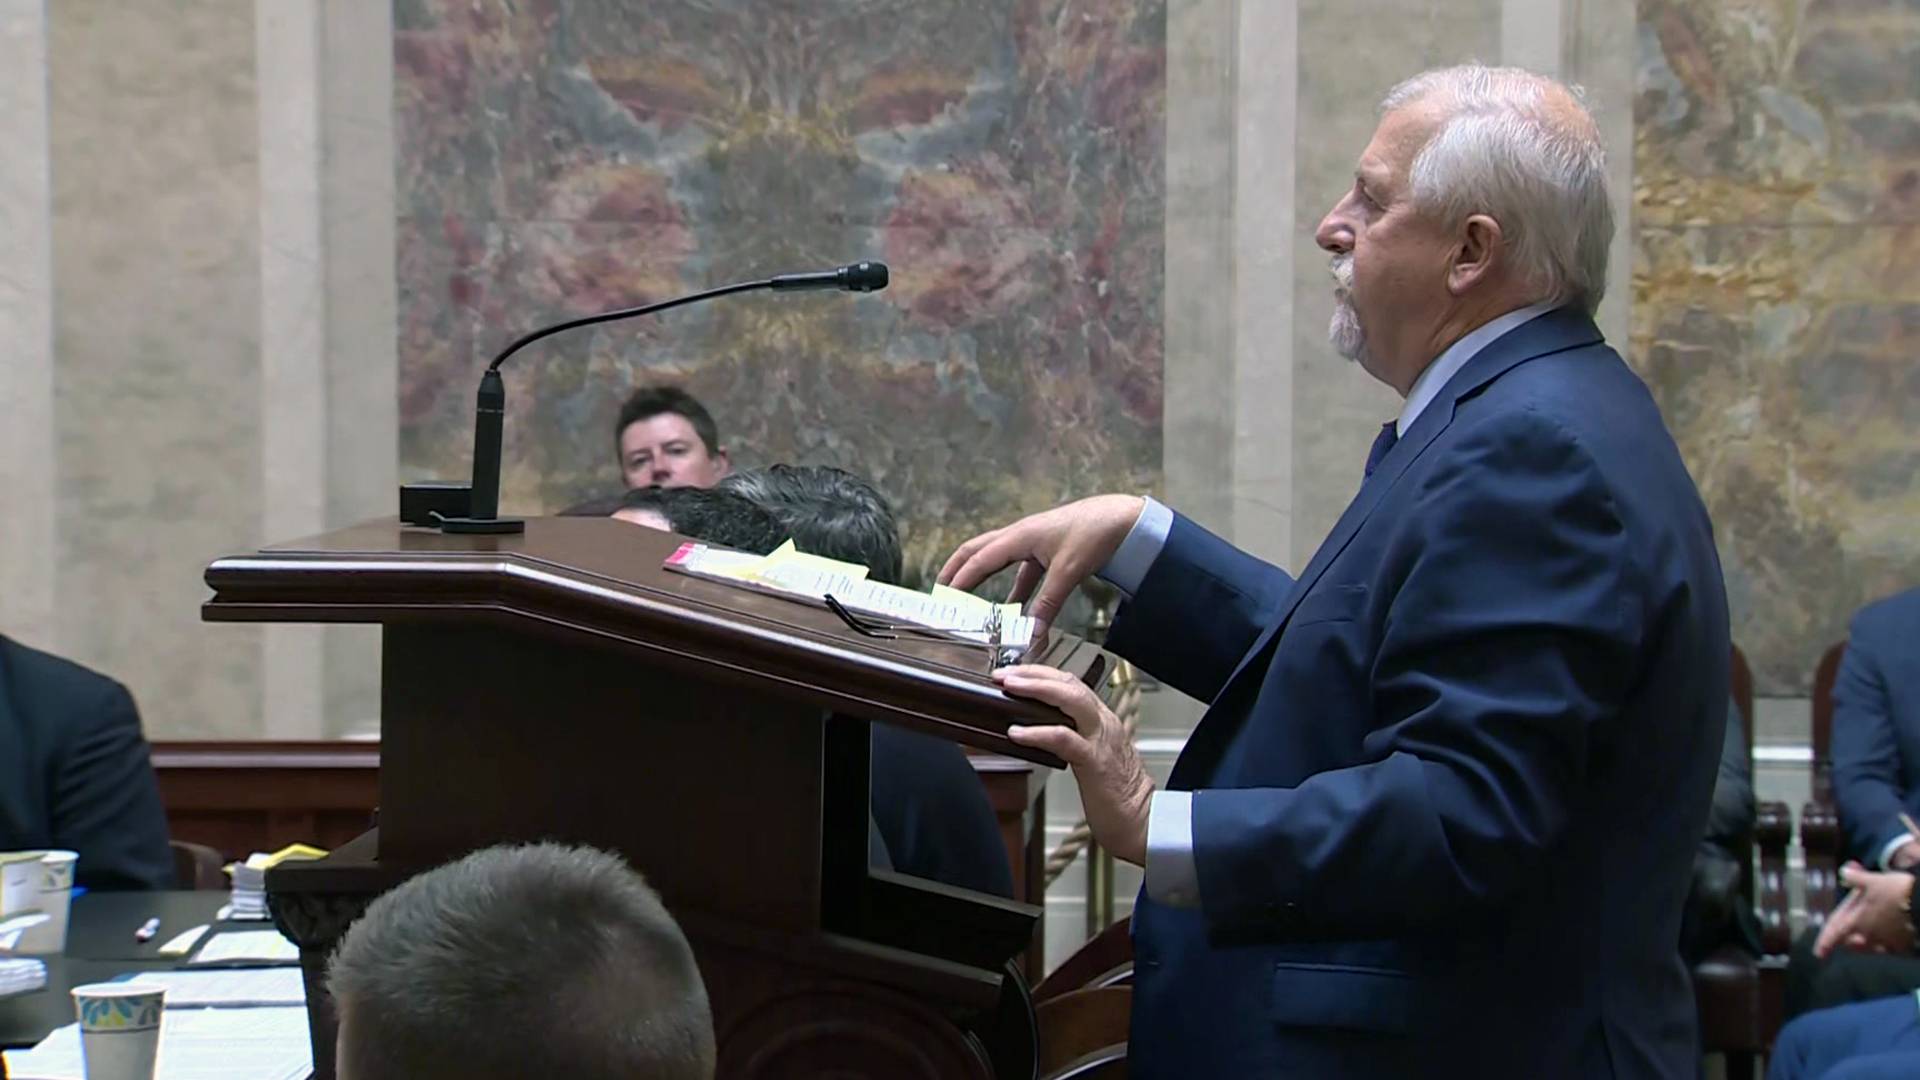 Rick Esenberg gestures with his right hand while standing behind a wood podium and speaking into a microphone mounted to its top with other people seated in the foreground and background in a room with marble walls.